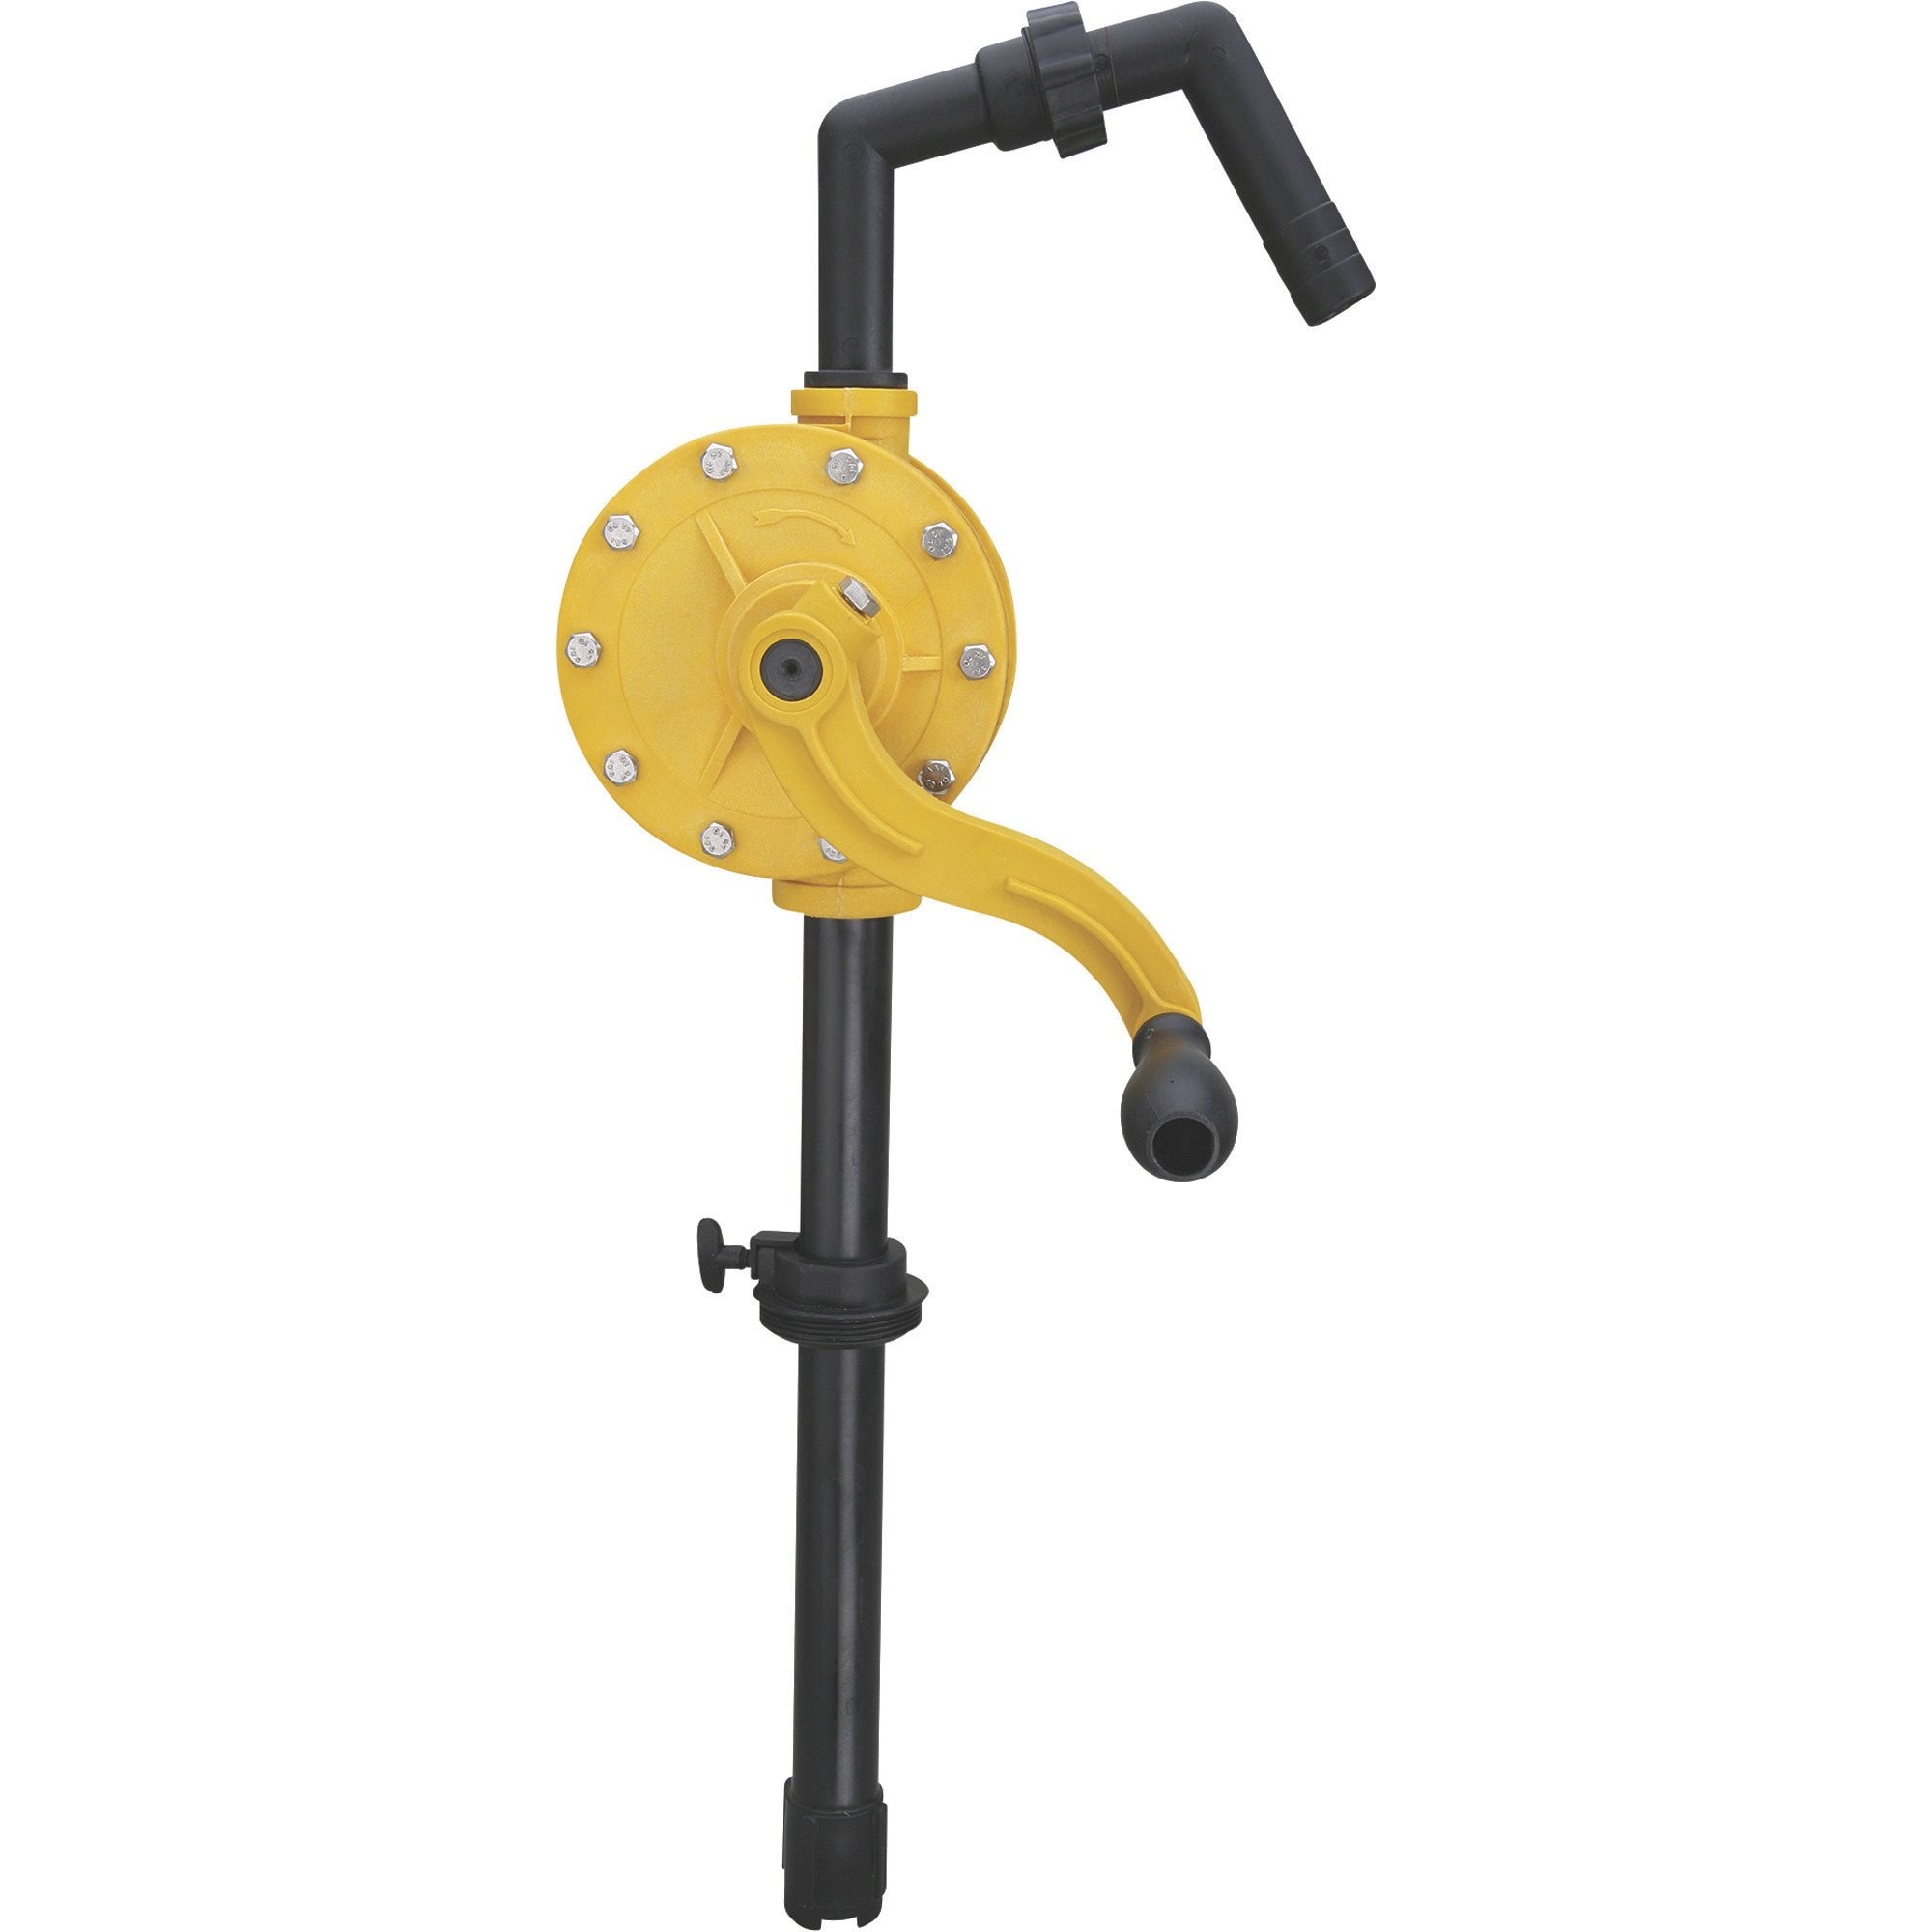 Cast iron hand operated rotary pump for 15-55 gallon drums